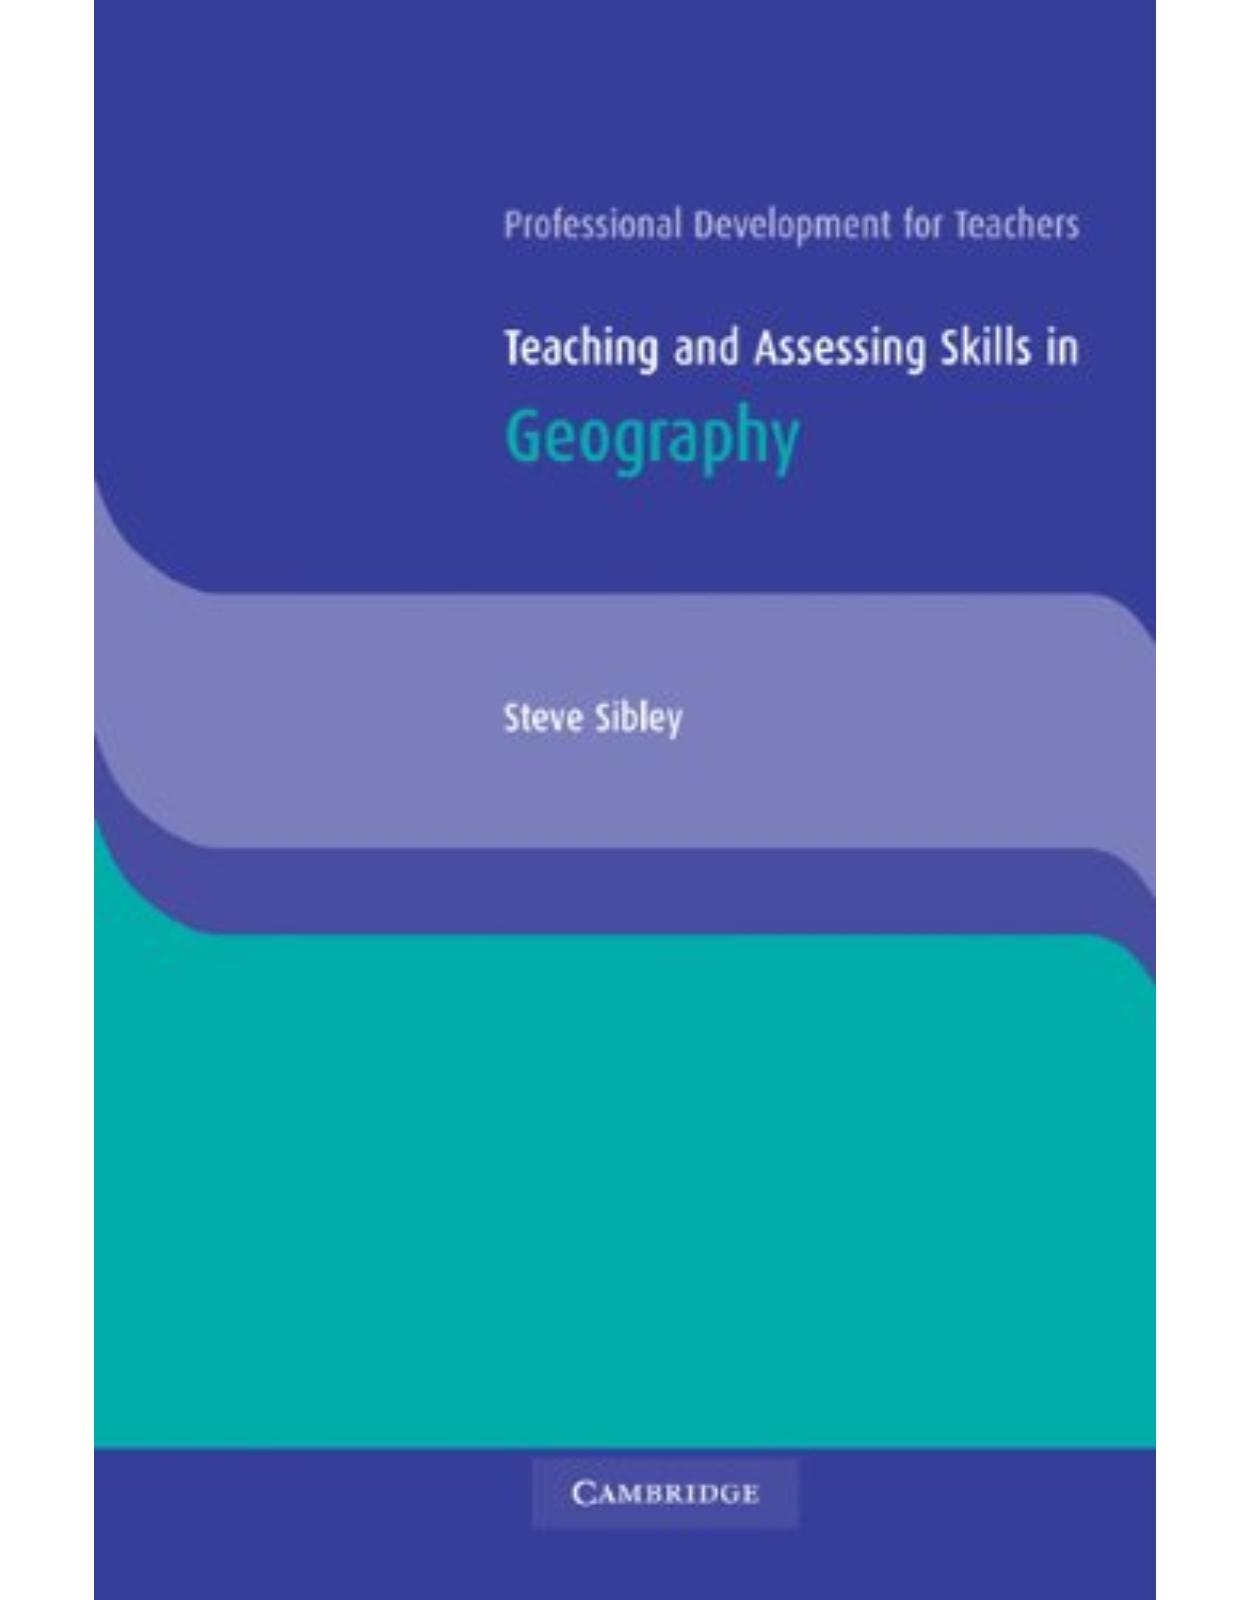 Teaching and Assessing Skills in Geography